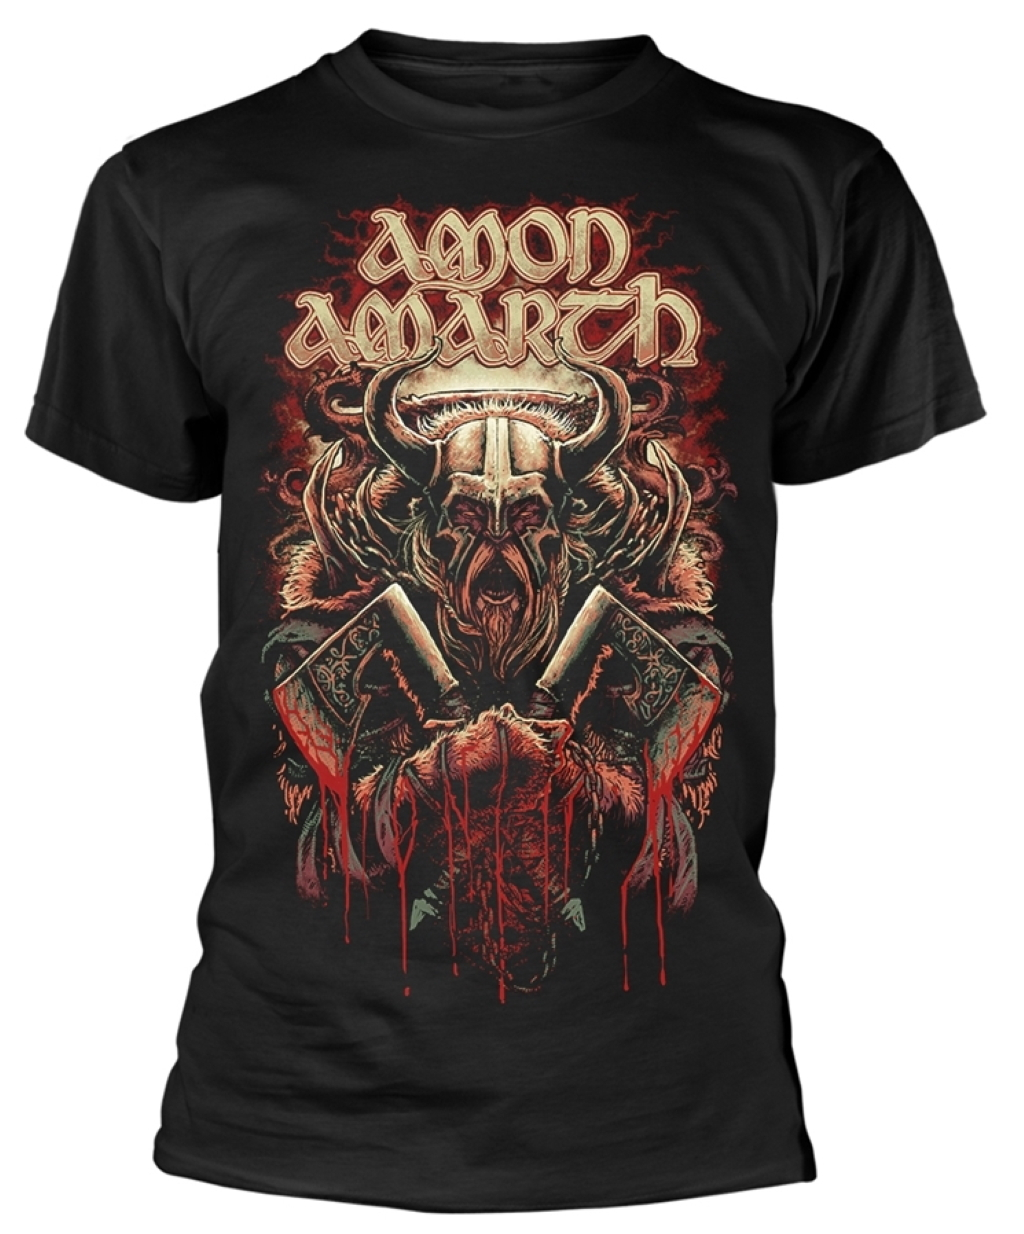 Amon Amarth Fight Black T Shirt New Official Ebay High quality amon amarth gifts and merchandise. amon amarth